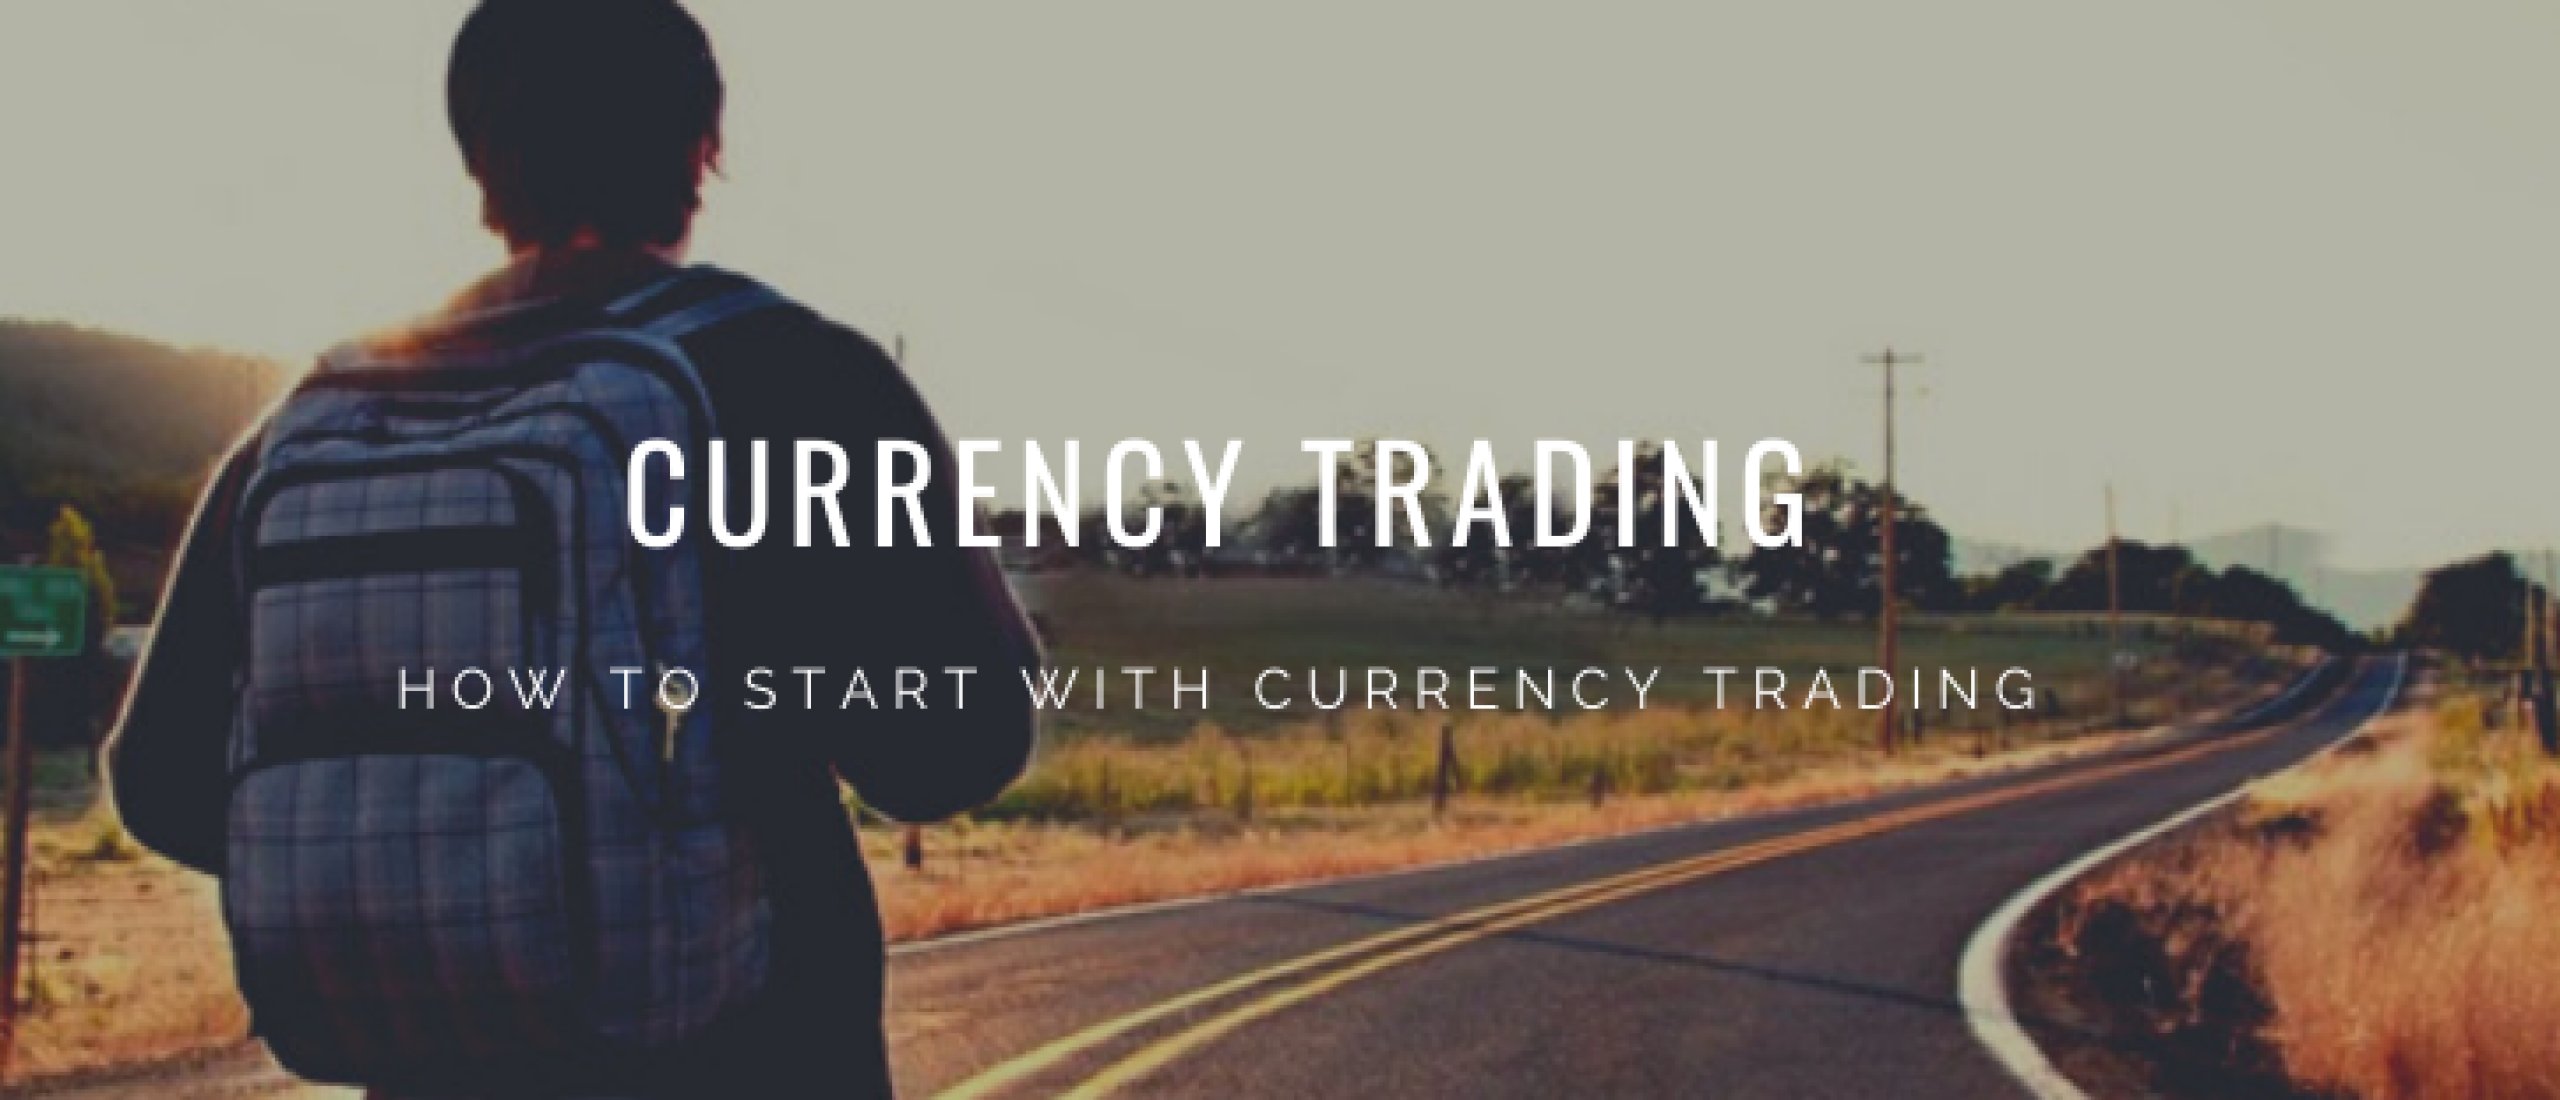 Currency Trading Explained: How To Begin Trading in Currencies?